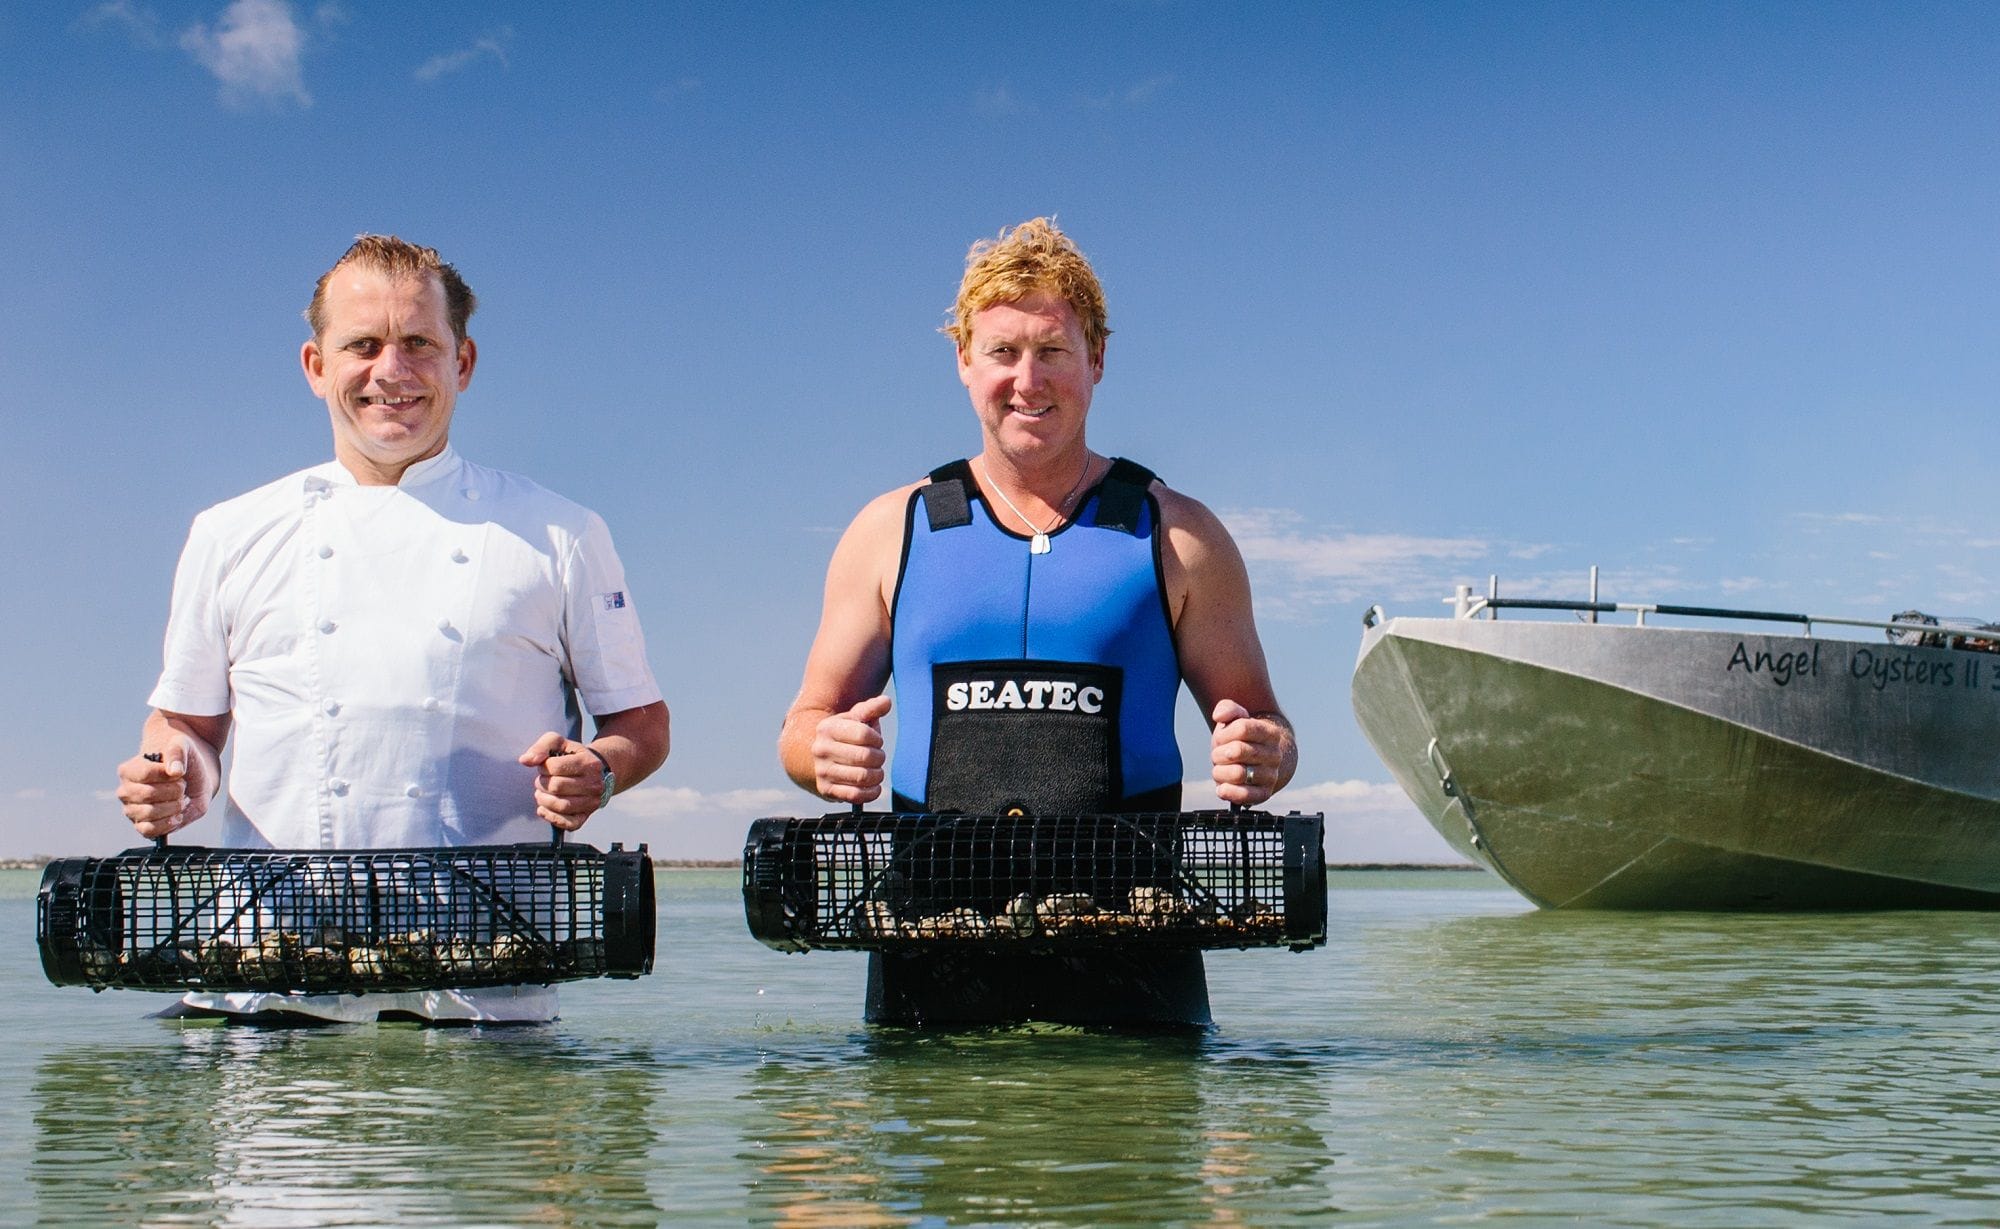 Angel Seafood cleaning up in our oceans one oyster at a time